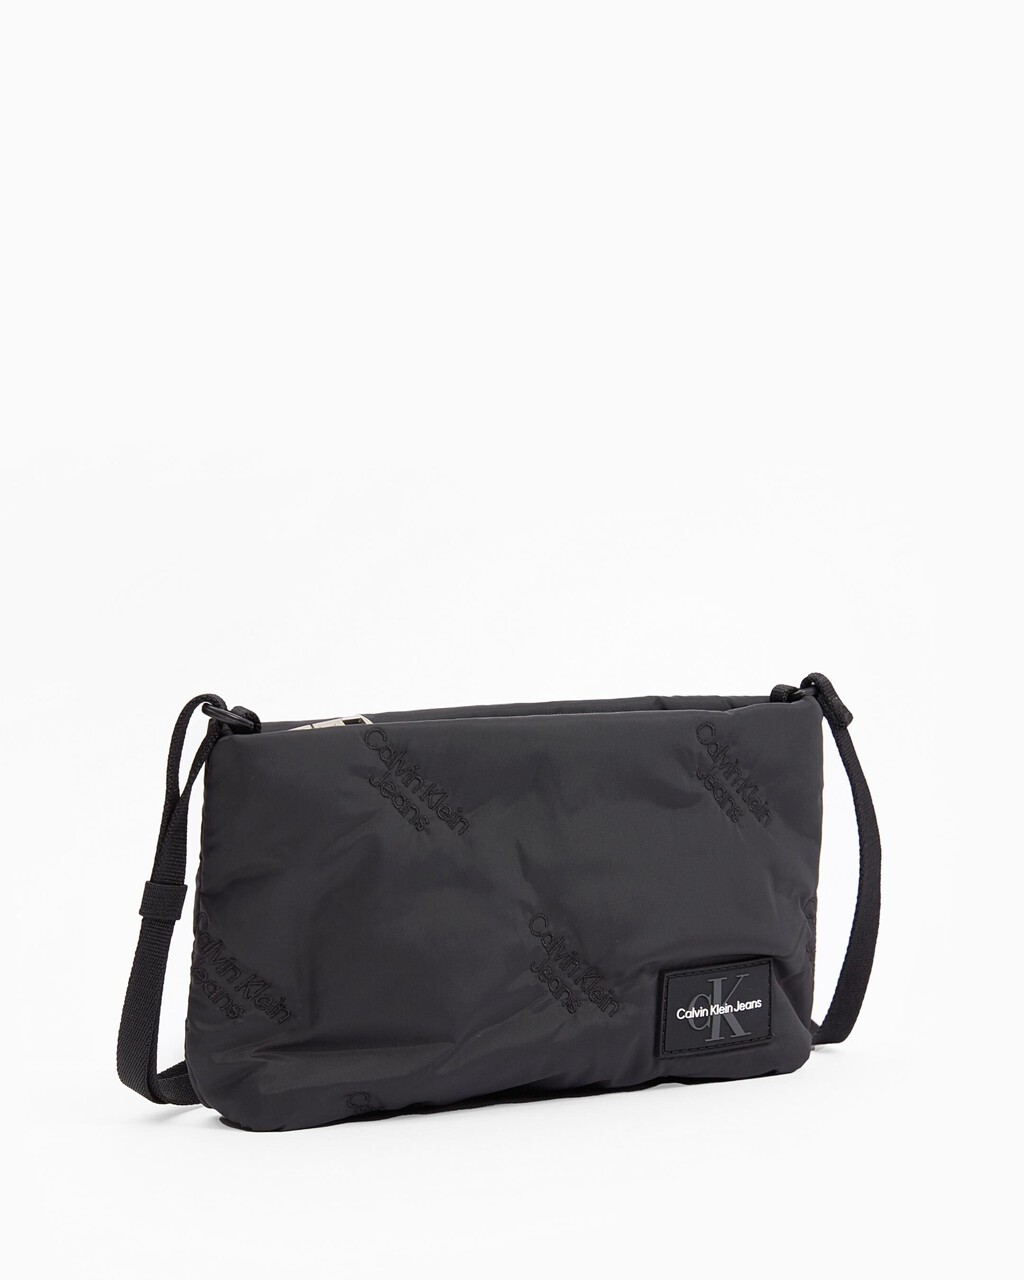 Puffy All Over Embroidery Phone Crossbody, BLACK, hi-res